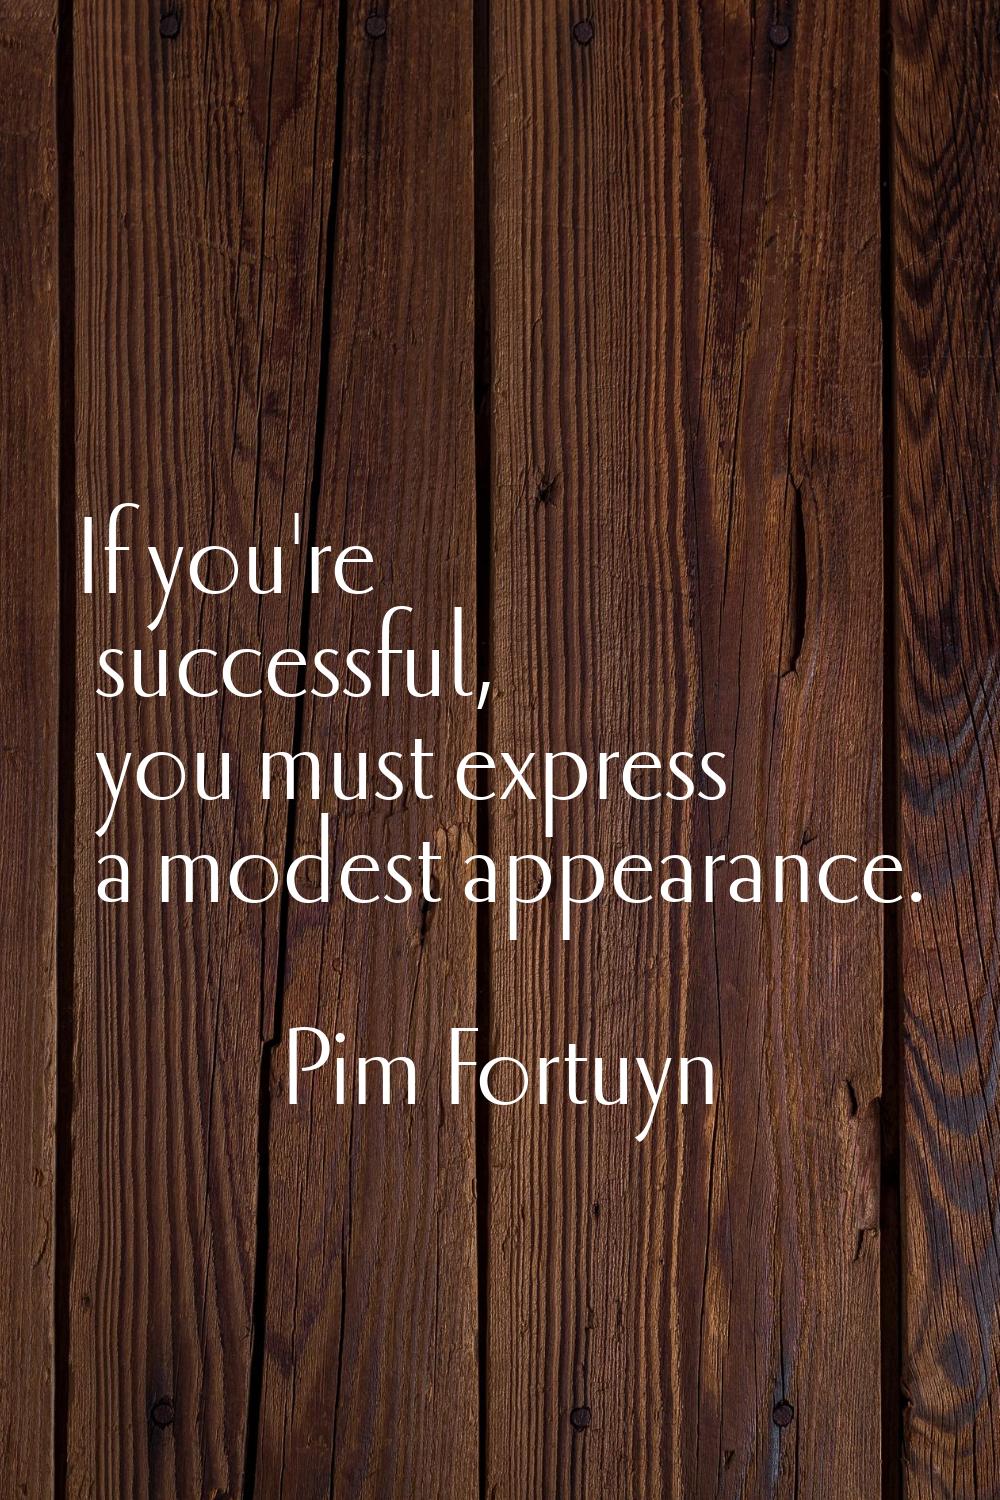 If you're successful, you must express a modest appearance.